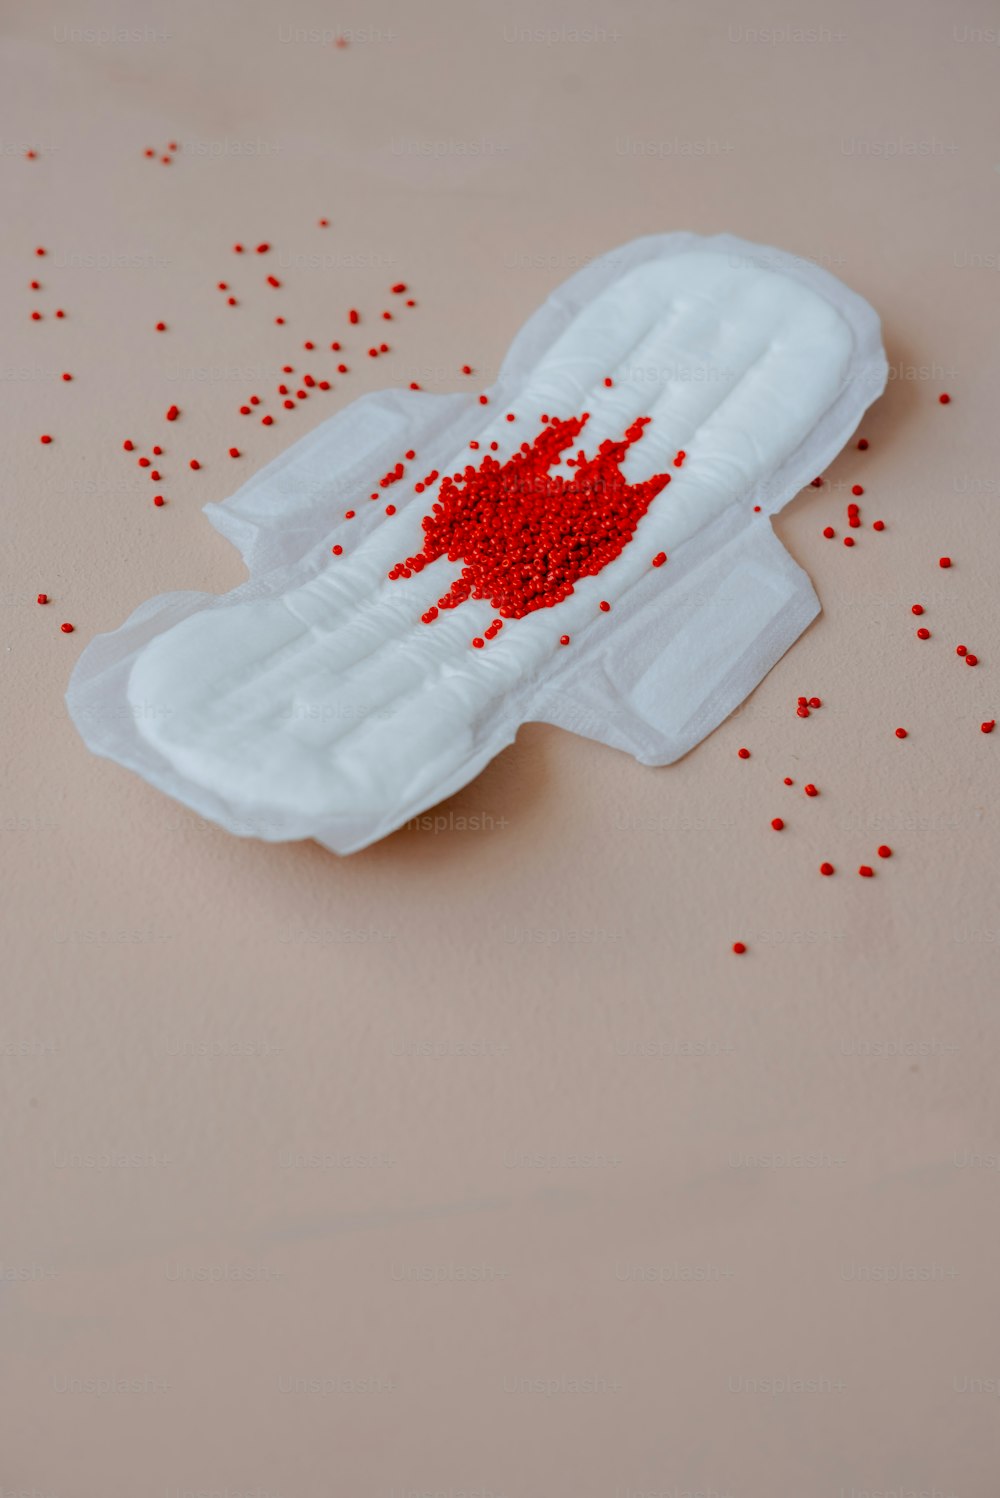 a piece of white paper with red sprinkles on it